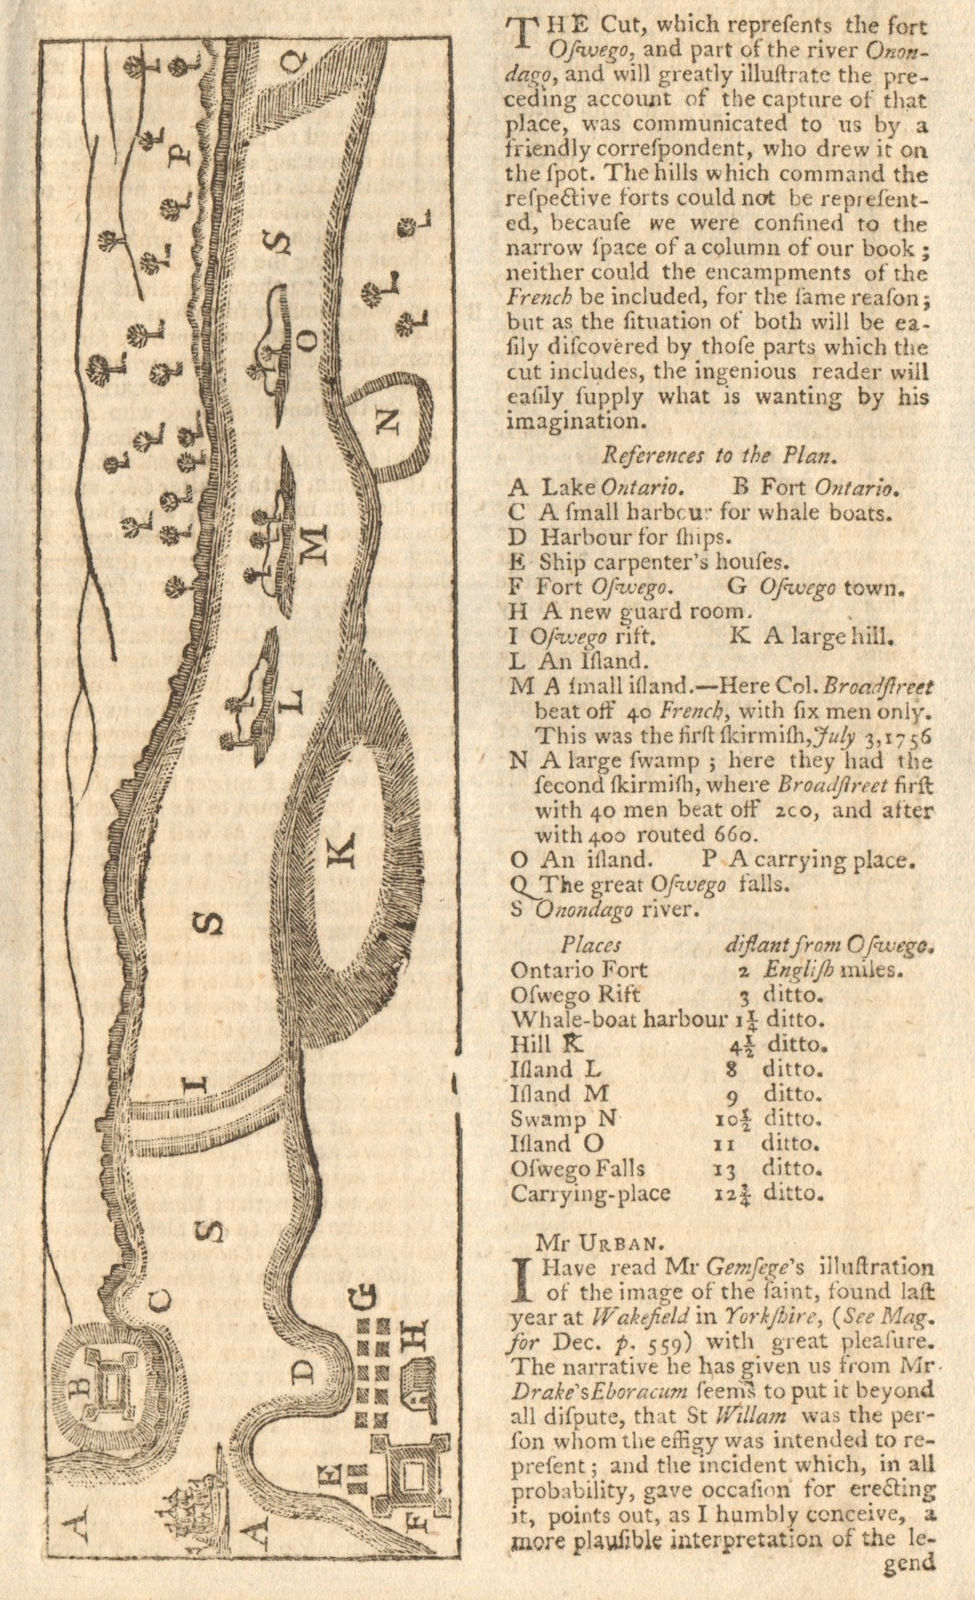 Plan of the Forts Ontario & Oswego. River Onondago. New York. GENTS MAG 1757 map